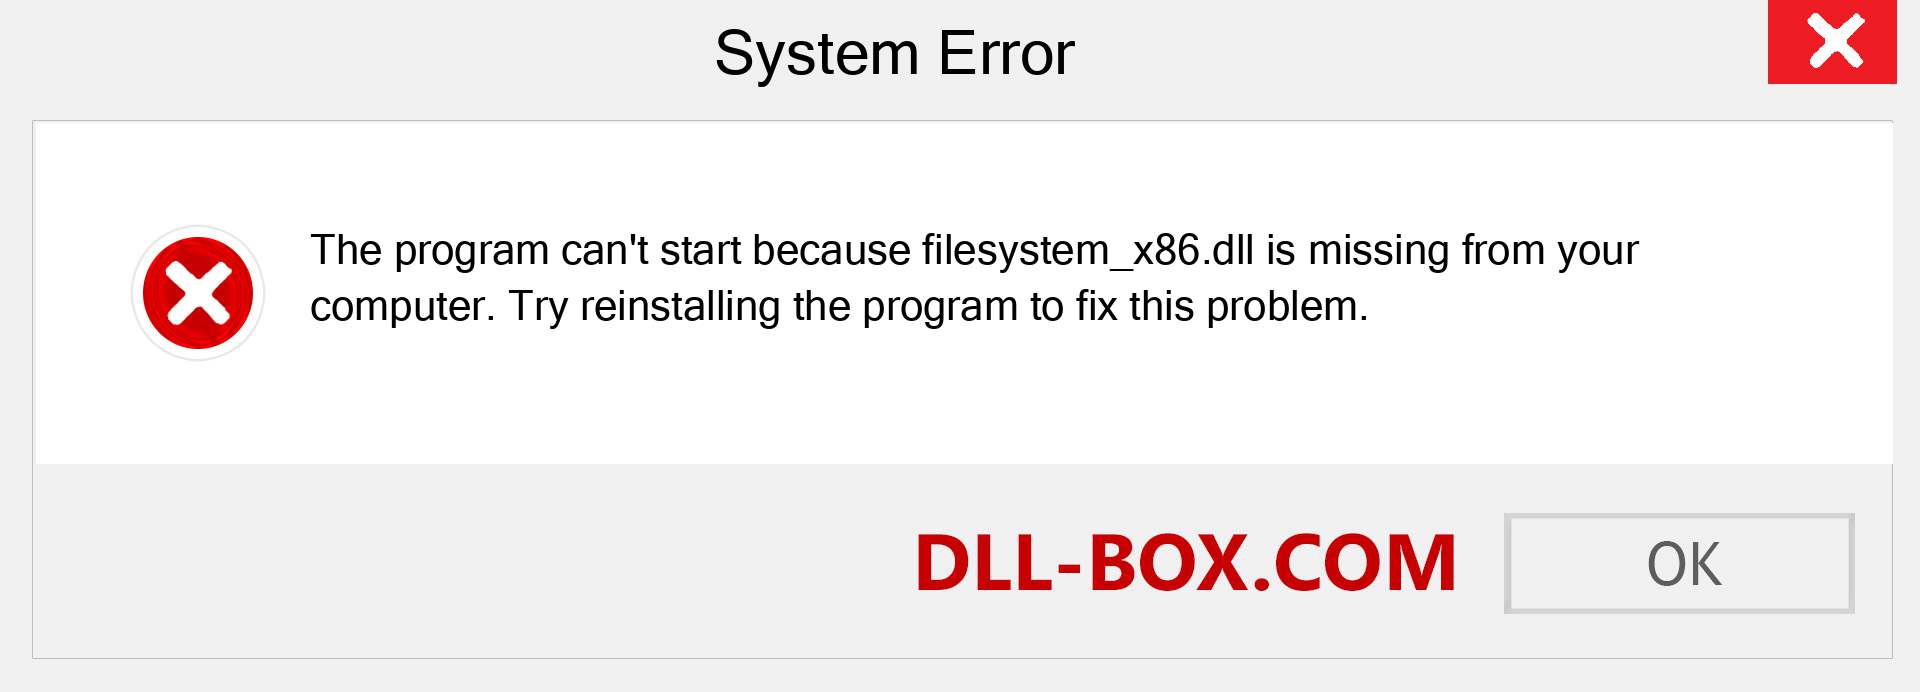  filesystem_x86.dll file is missing?. Download for Windows 7, 8, 10 - Fix  filesystem_x86 dll Missing Error on Windows, photos, images